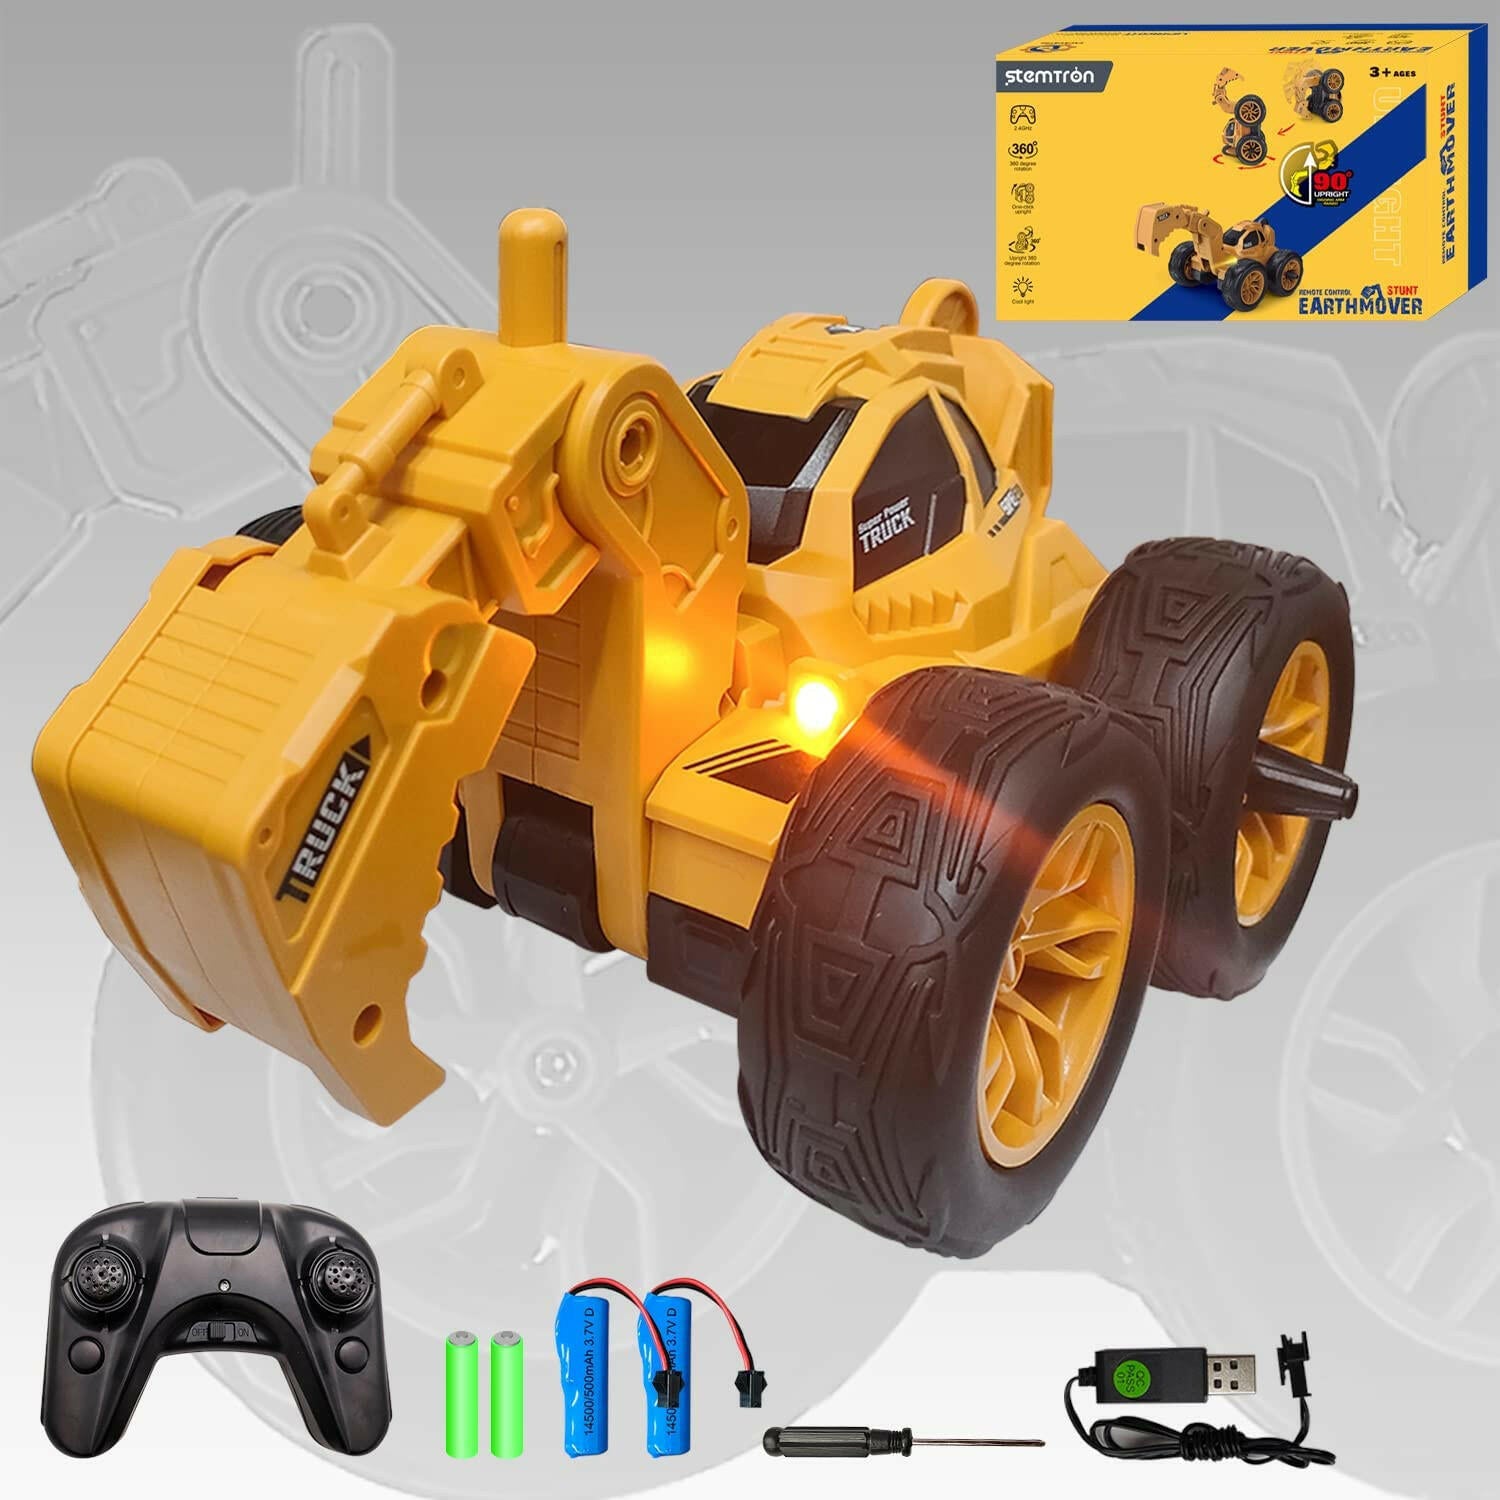 STEMTRON 2.4Ghz Remote Control Stunt Excavator with LED Light for Kids - EXHOBBY